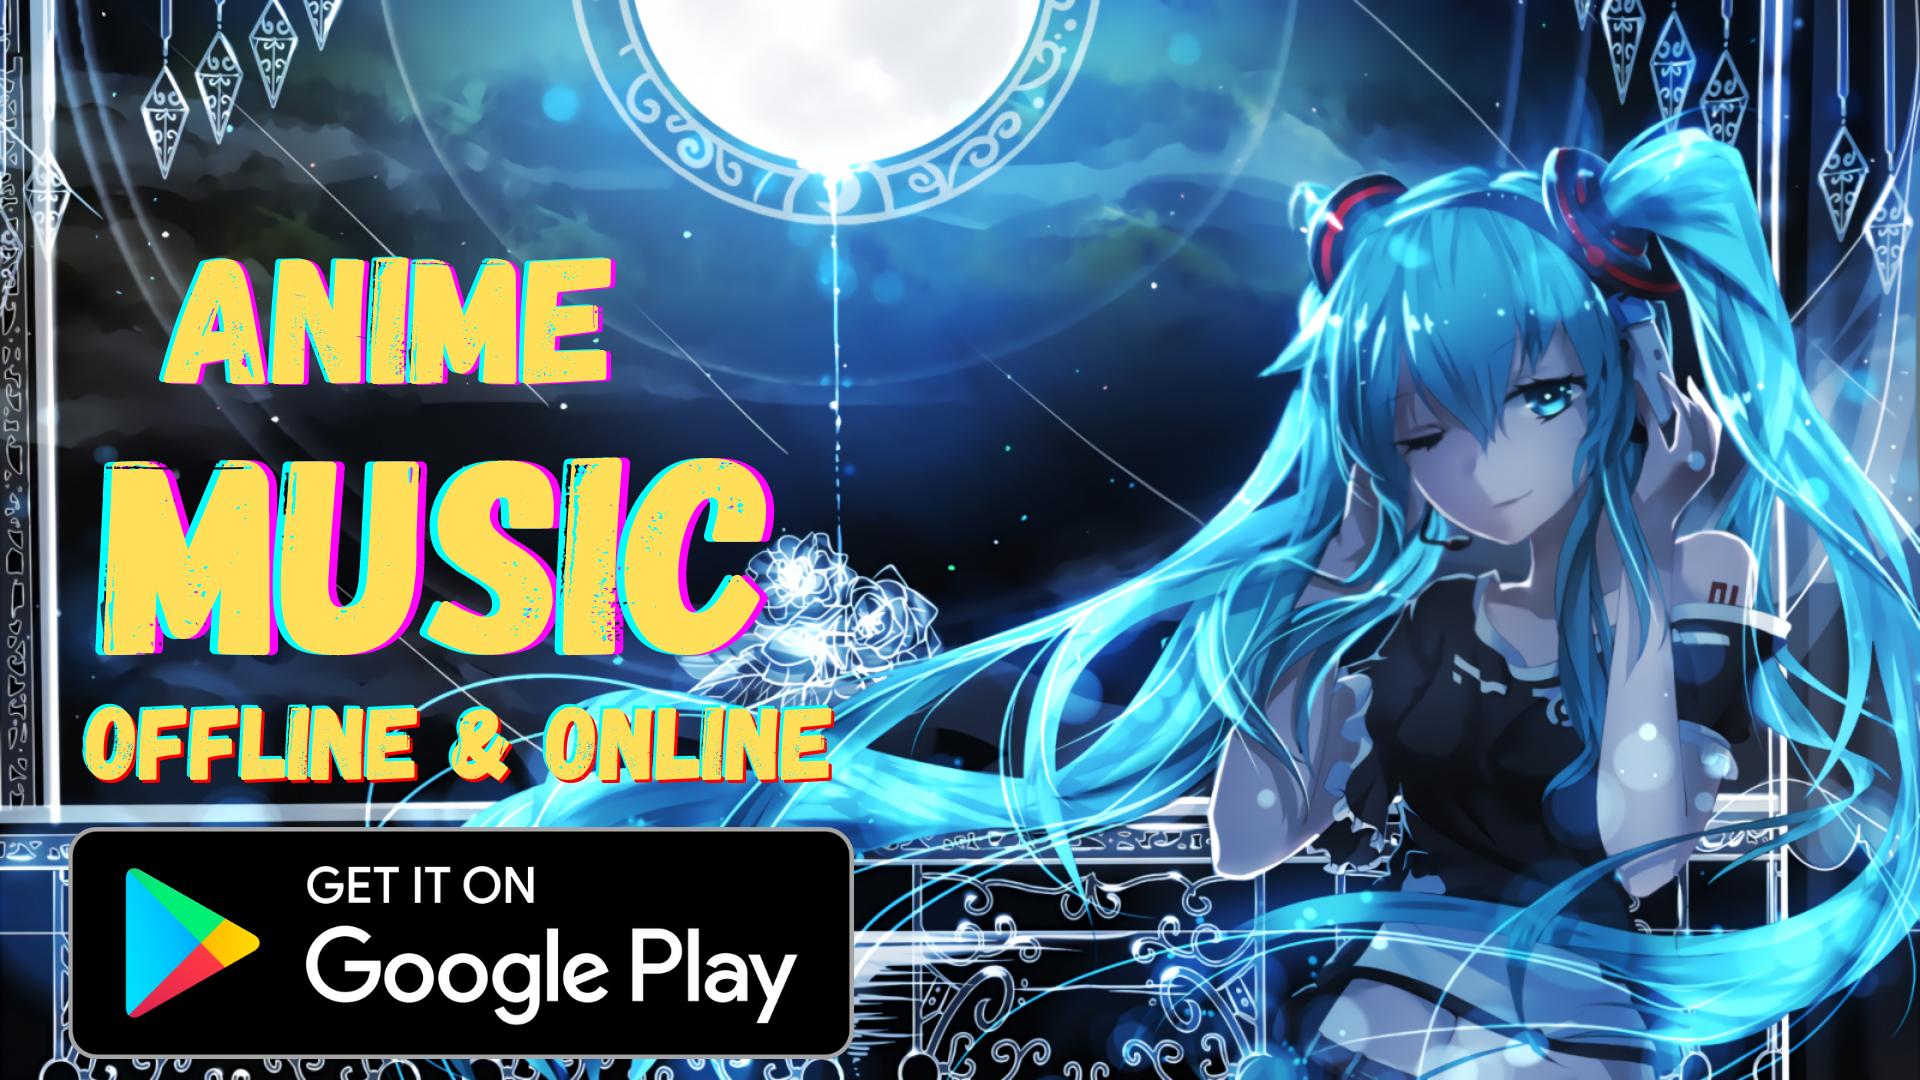 Anime Music - Best Anime Song Mp3 Offline for Android - APK Download